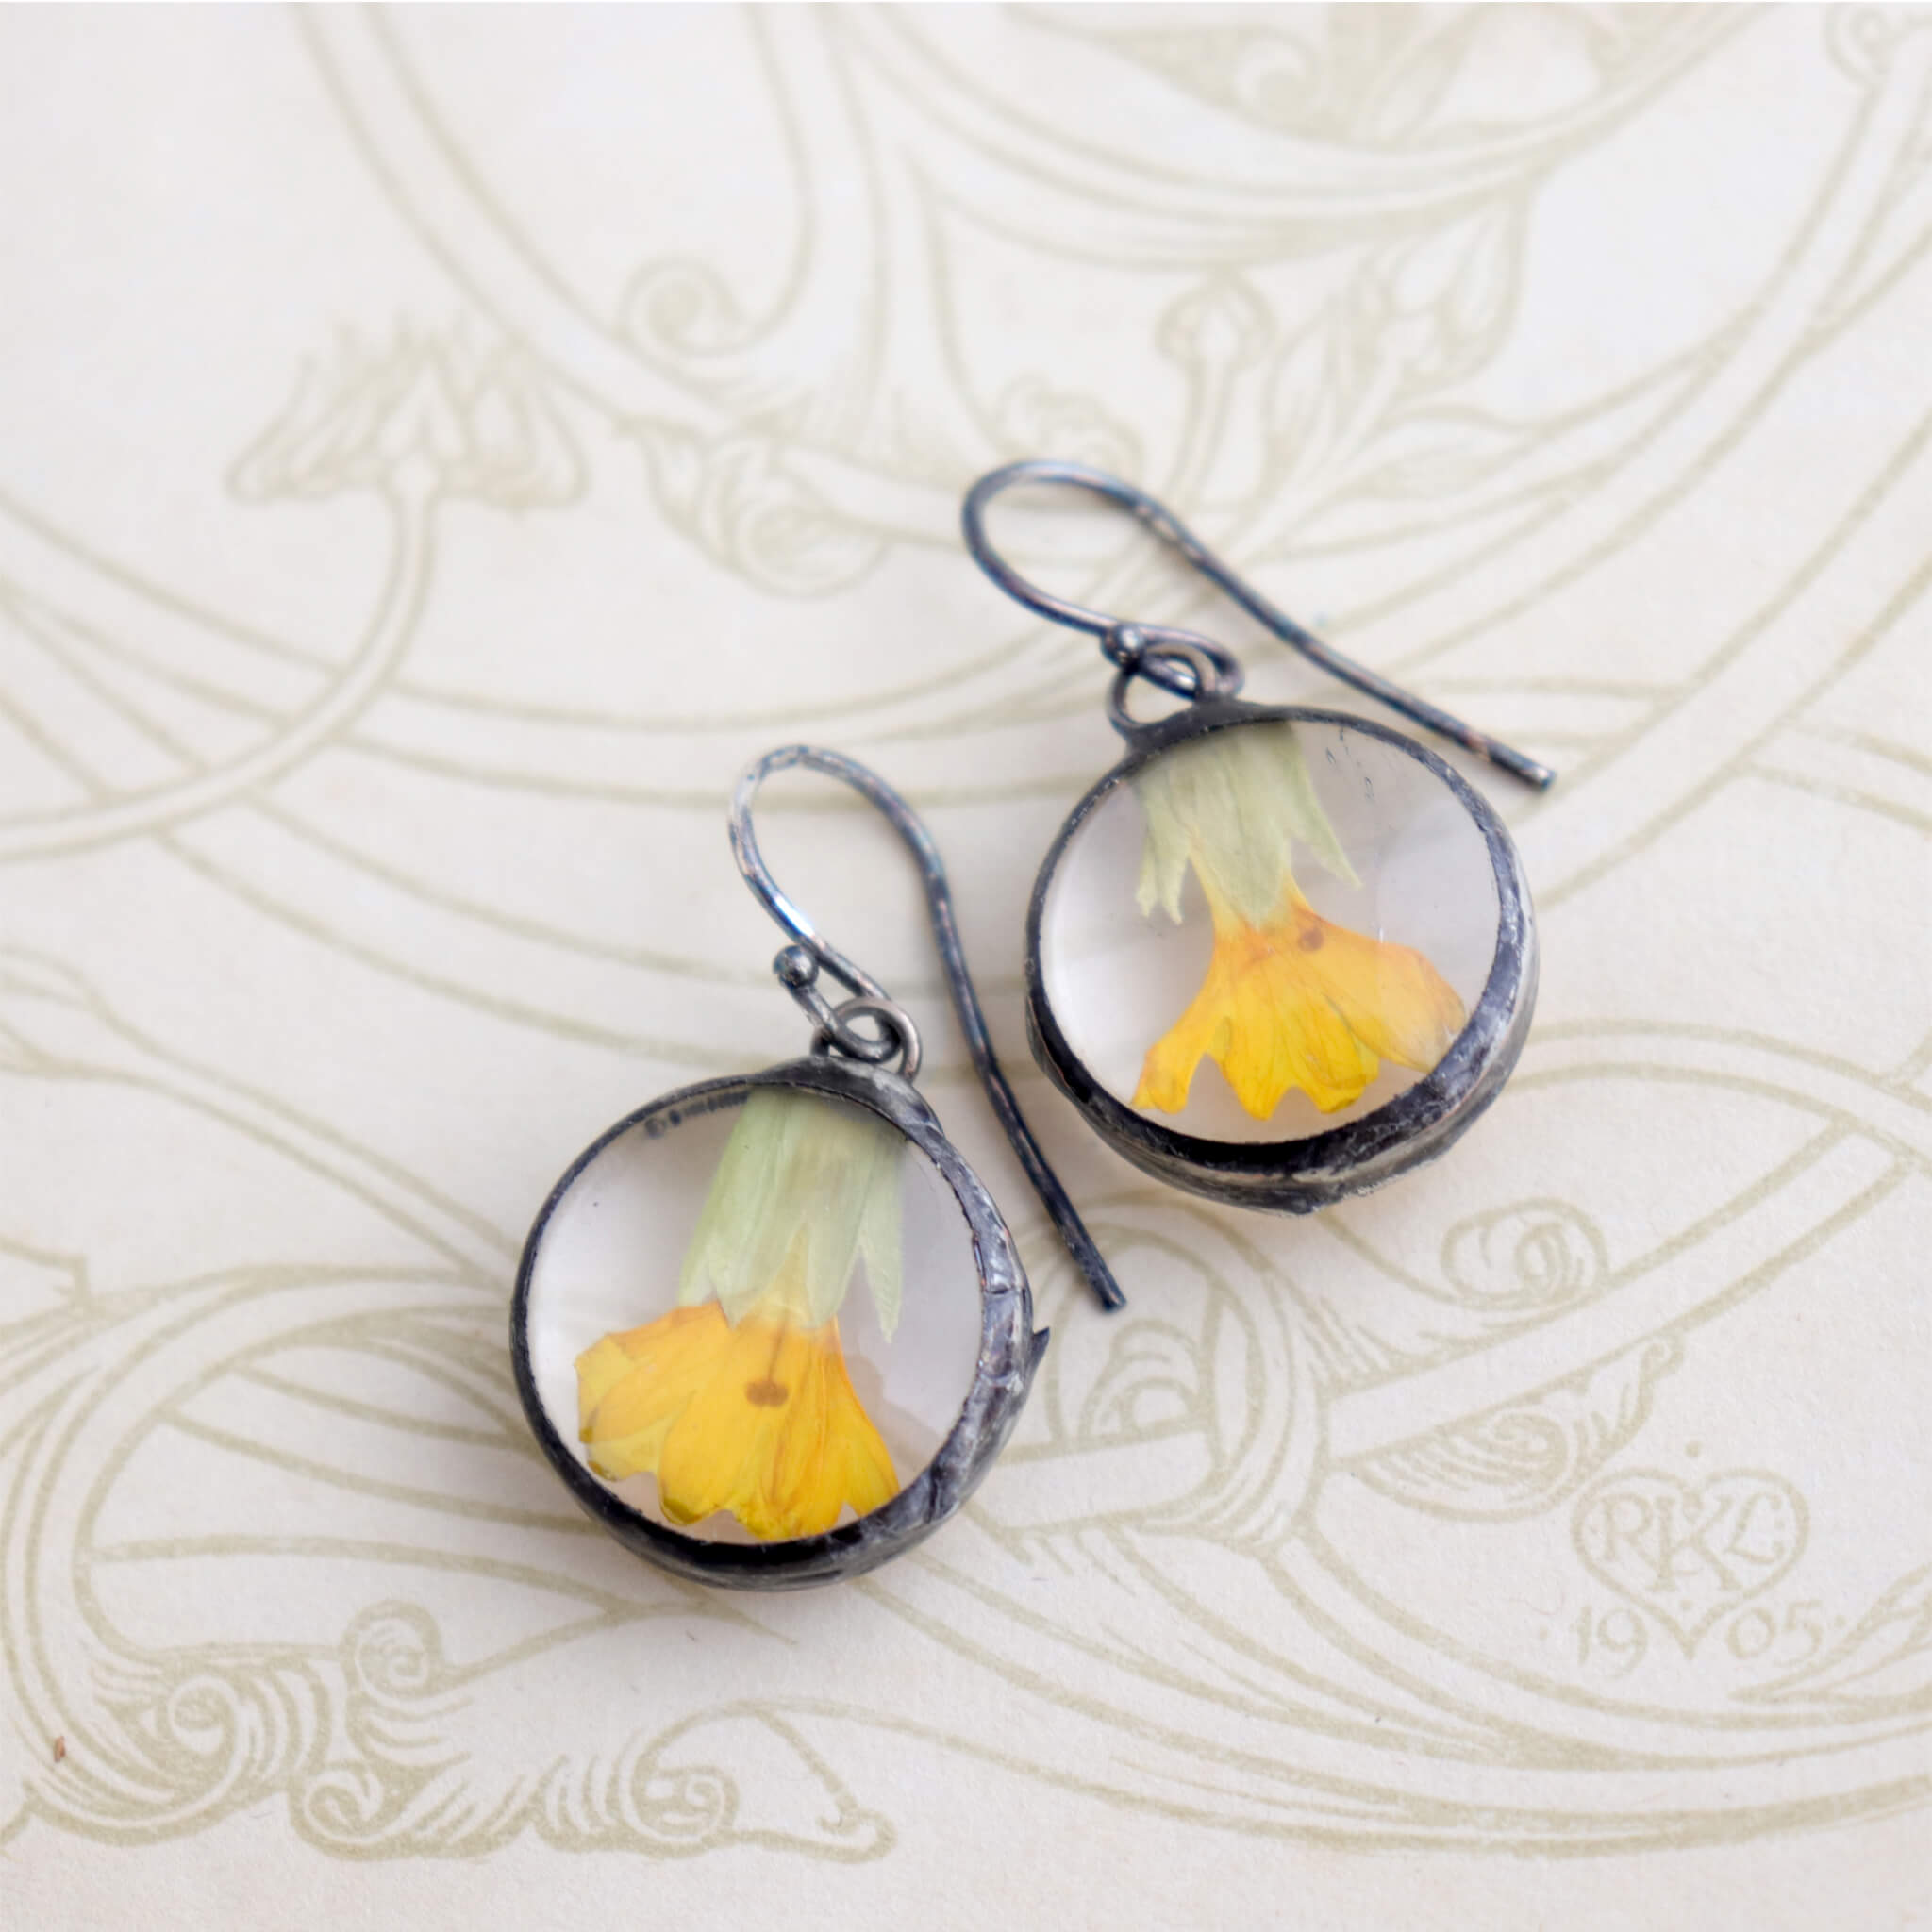 Primroses in soldered glass earrings lying on an old book